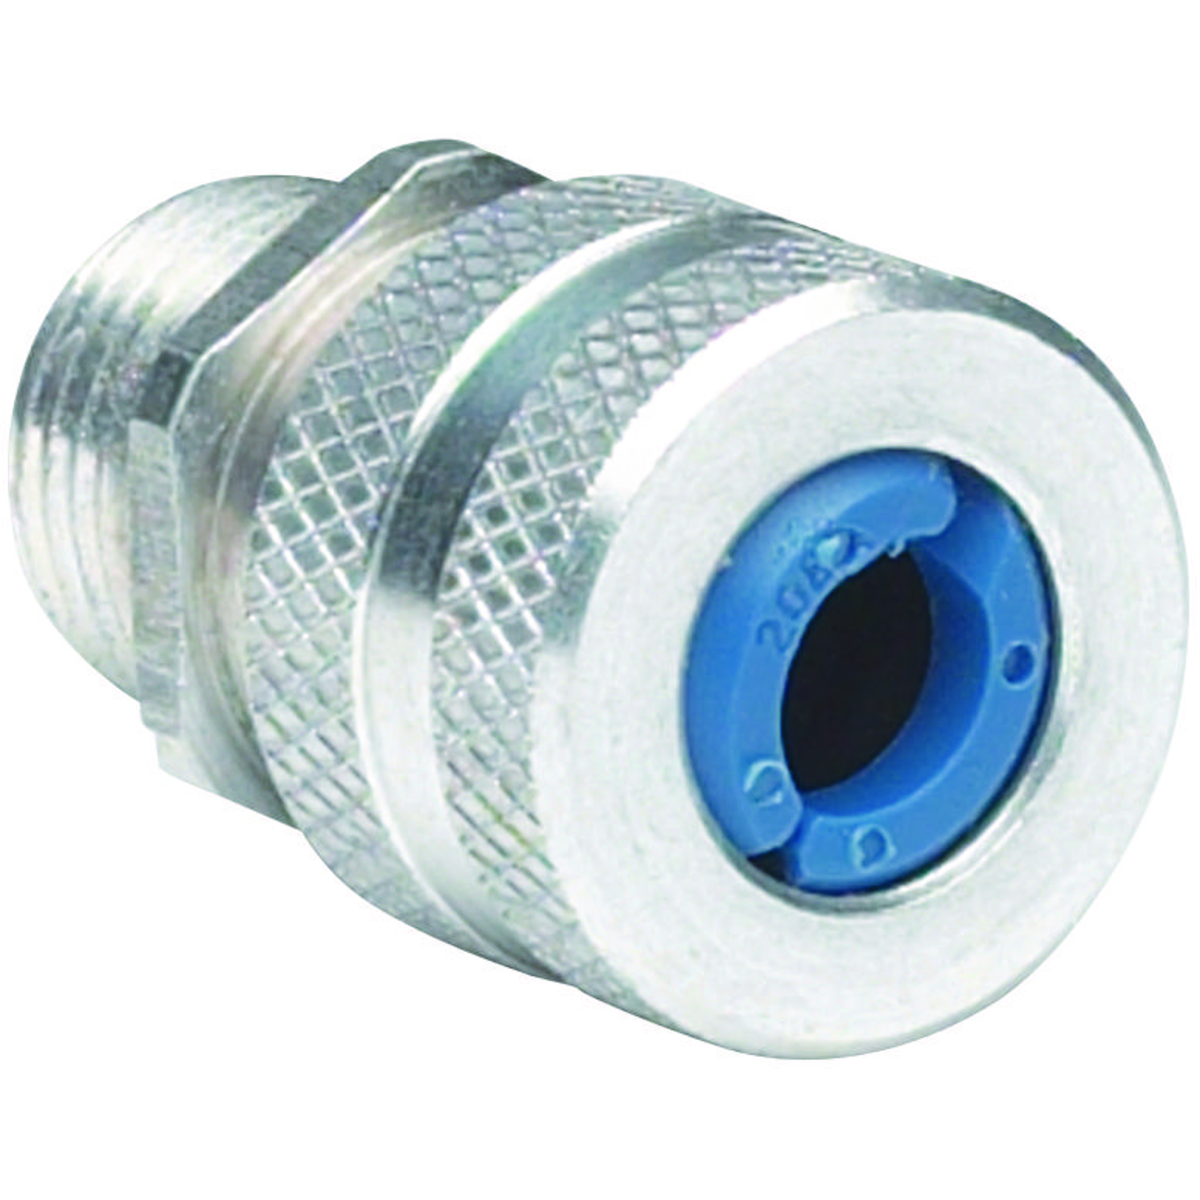 Z SERIES - ALUMINUM INCREASED SAFETY STRAIGHT CORD CONNECTOR - CORDRANGE 1.625 TO 1.750 - HUB SIZE 1-1/2 INCH NPT